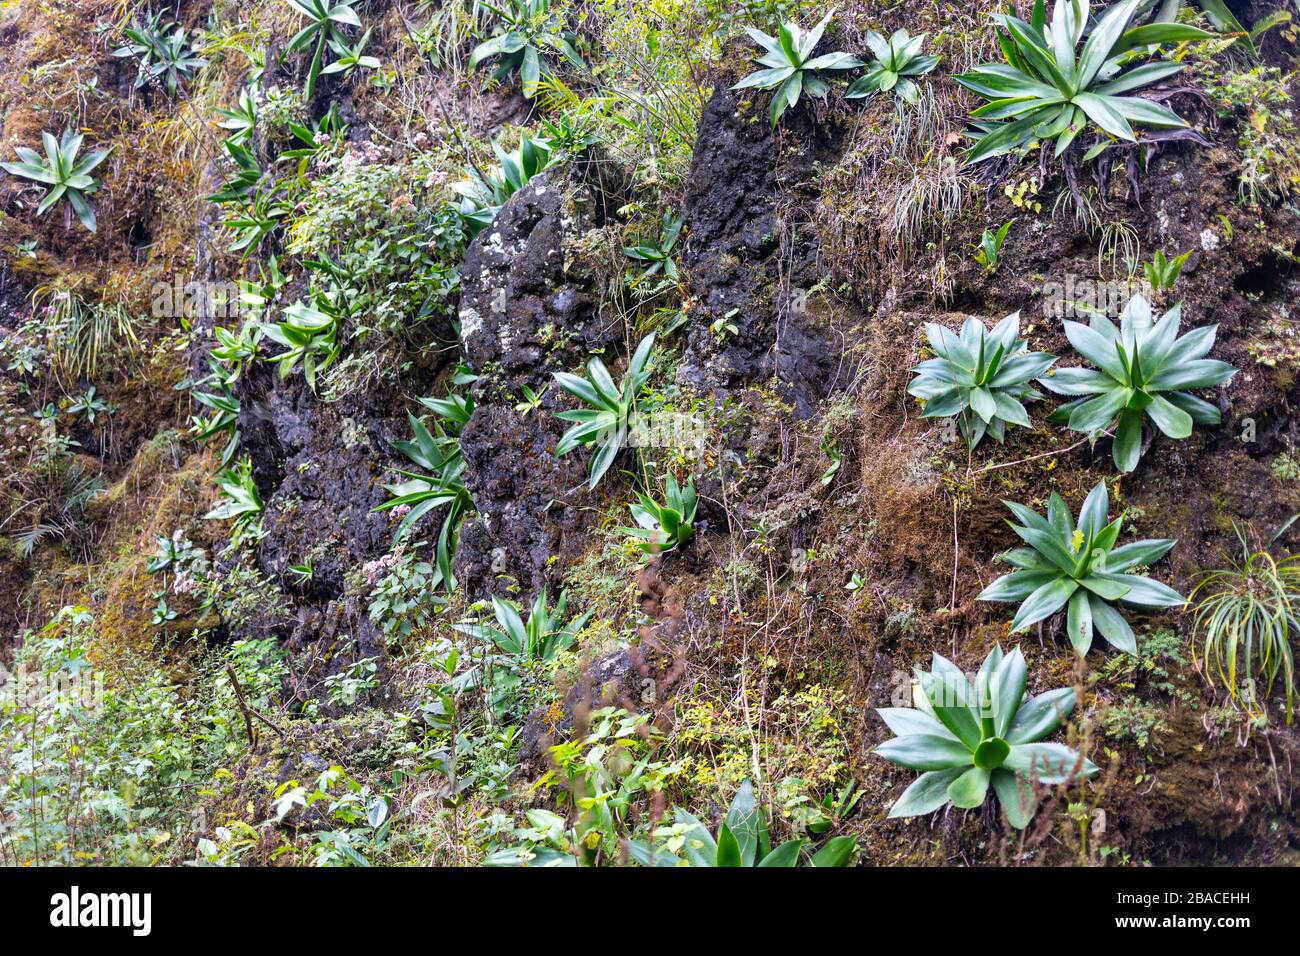 The Vegetation growing on the rocky hills of El Cielo, Tamaulipas, Mexico Stock Photo